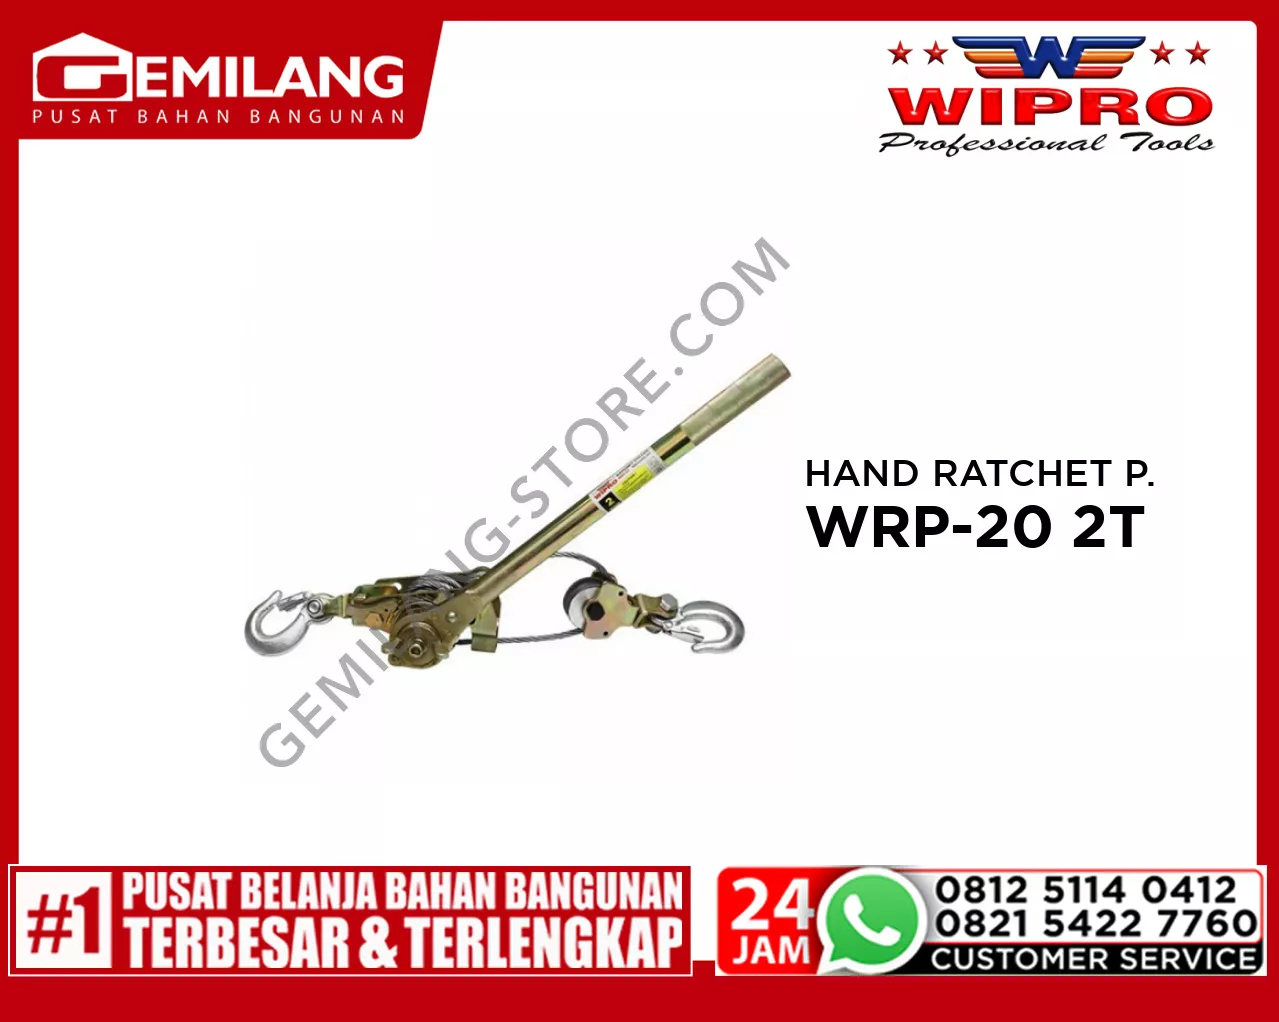 WIPRO HAND RATCHET PULLER WRP-20 2T